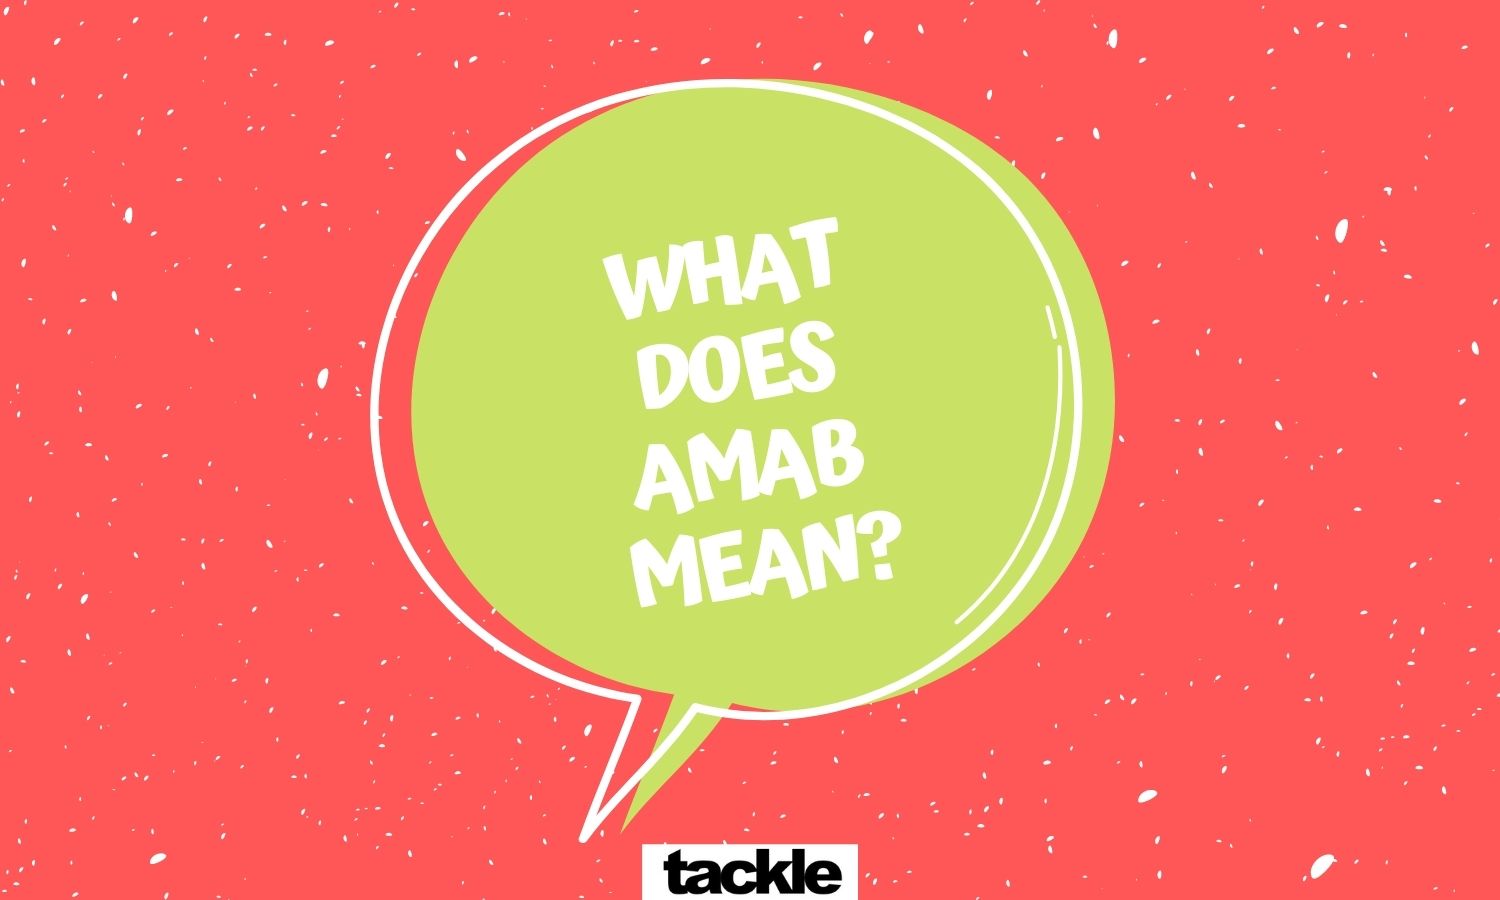 What does AMAB mean?